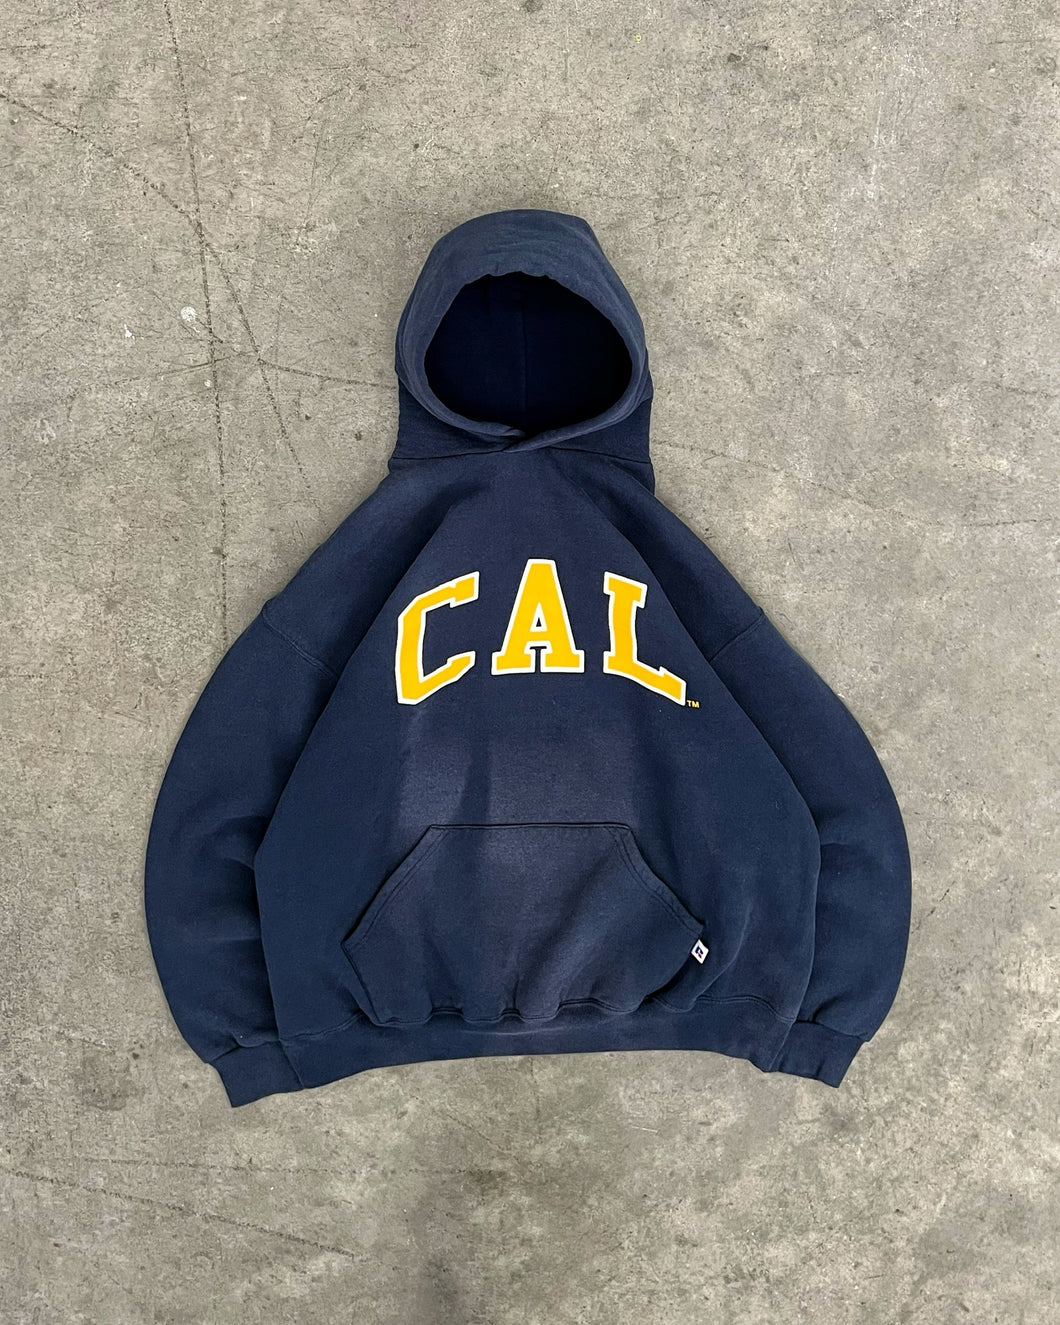 SUN FADED NAVY BLUE “CAL” RUSSELL HOODIE - 1990S